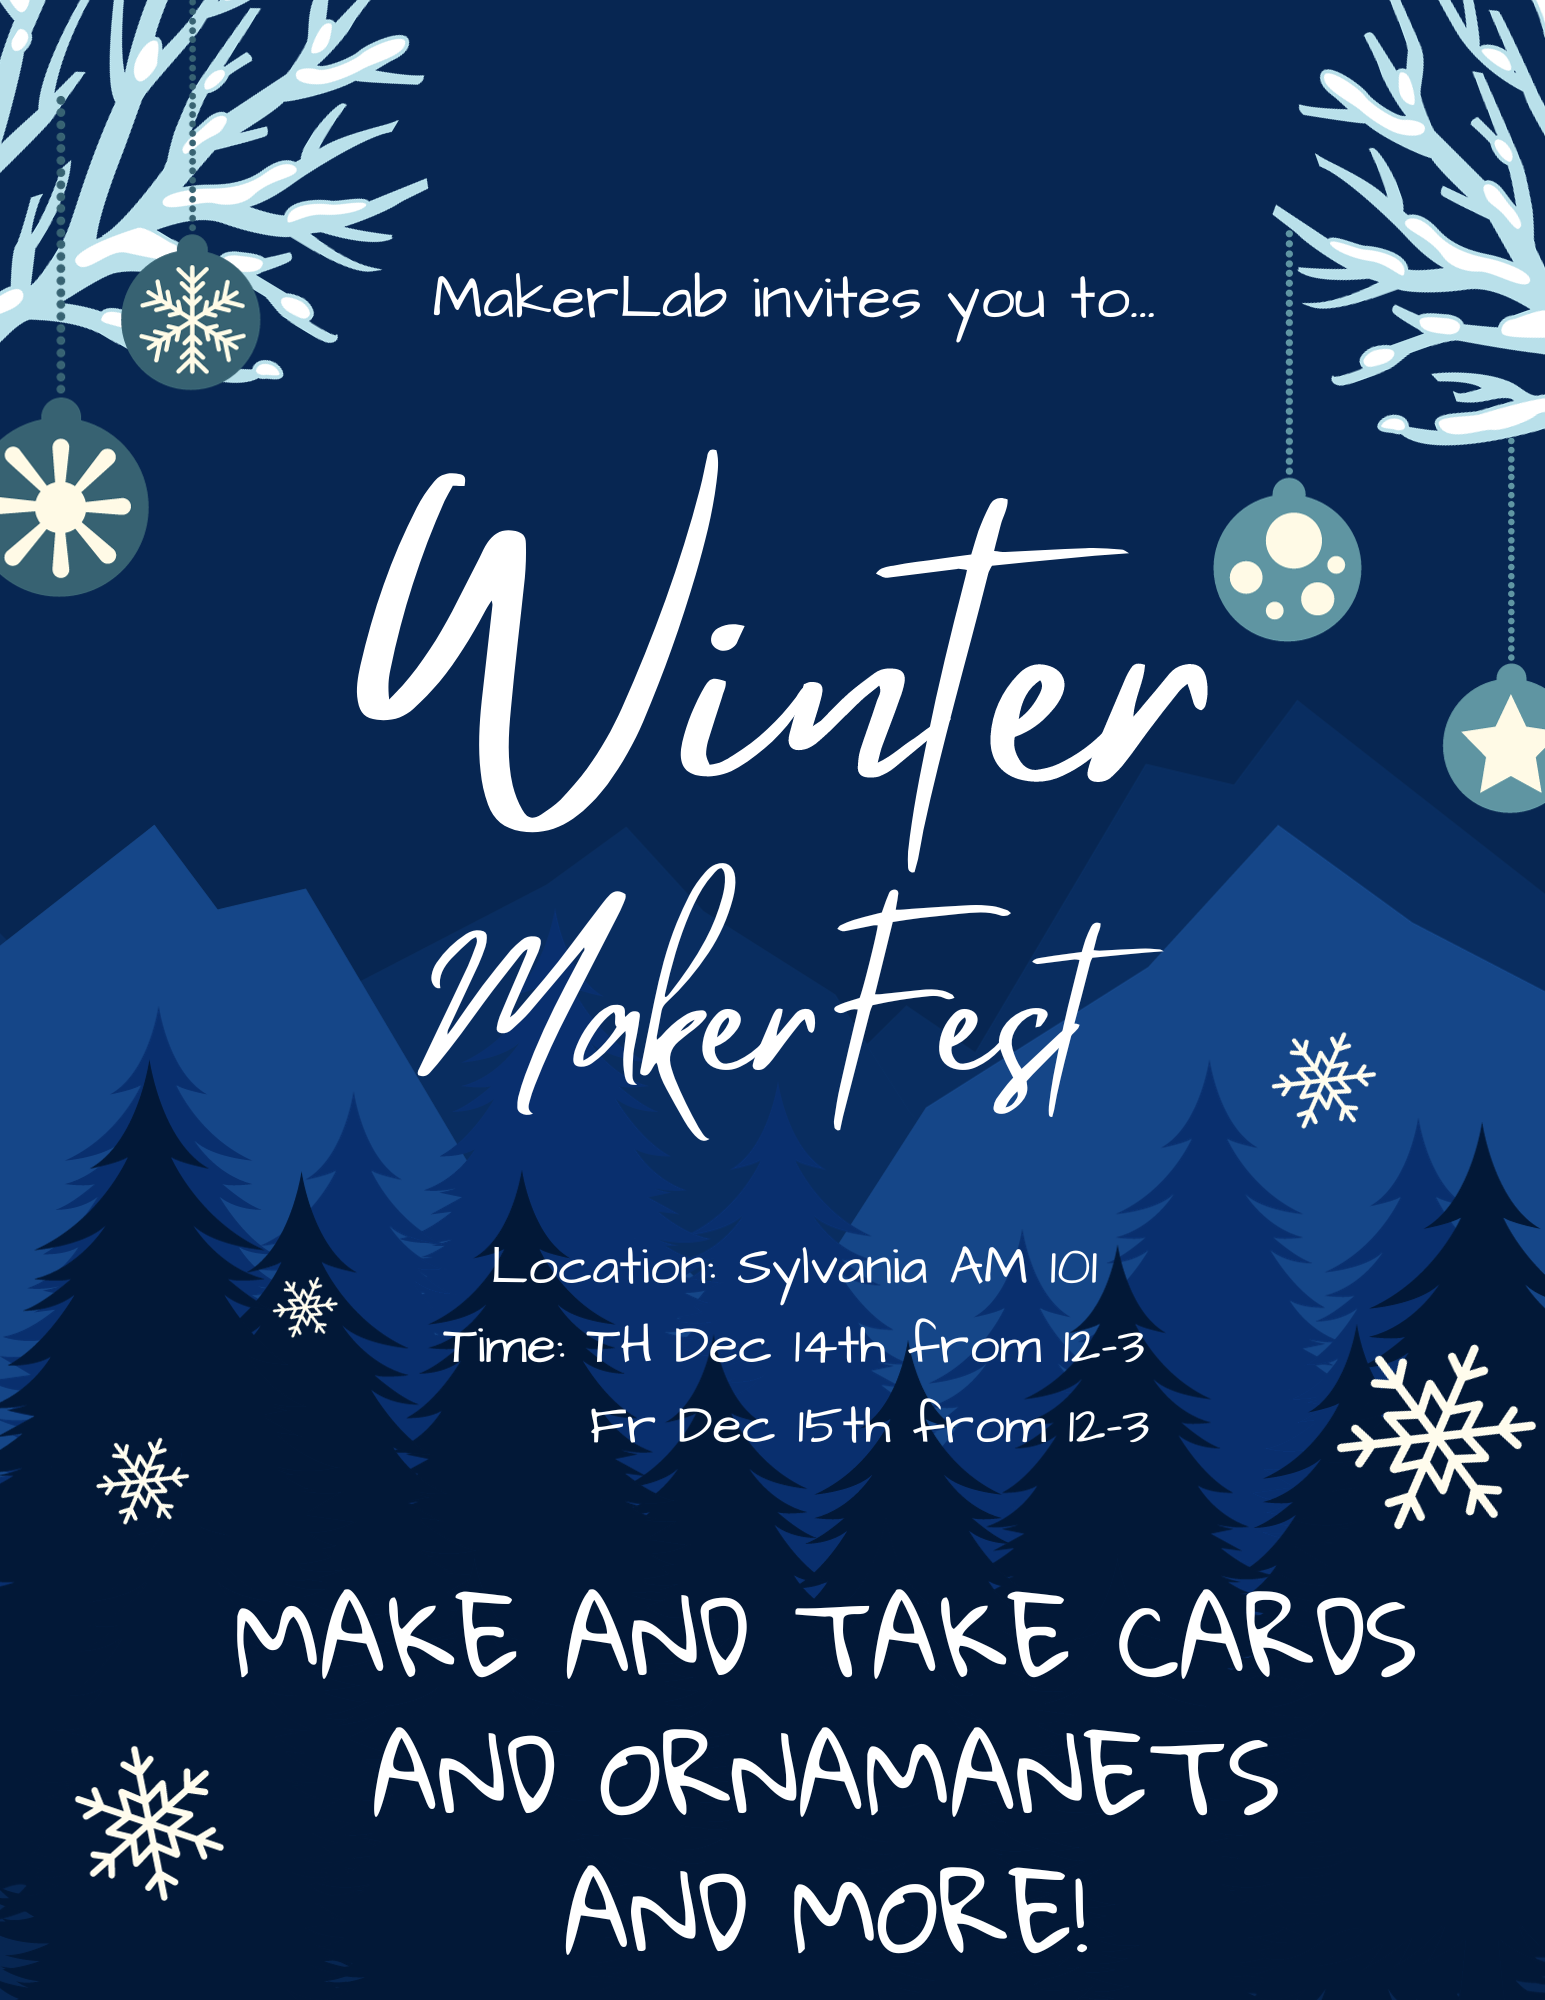 The Sylvania MakerLab invites you to...Winter MakerFest.  Location: Sylvania AM 101.  Time: Thursday, December 14th from 12 to 3pm and Friday, December 15th from 12 to 3pm. Make and take cards and ornaments and more!